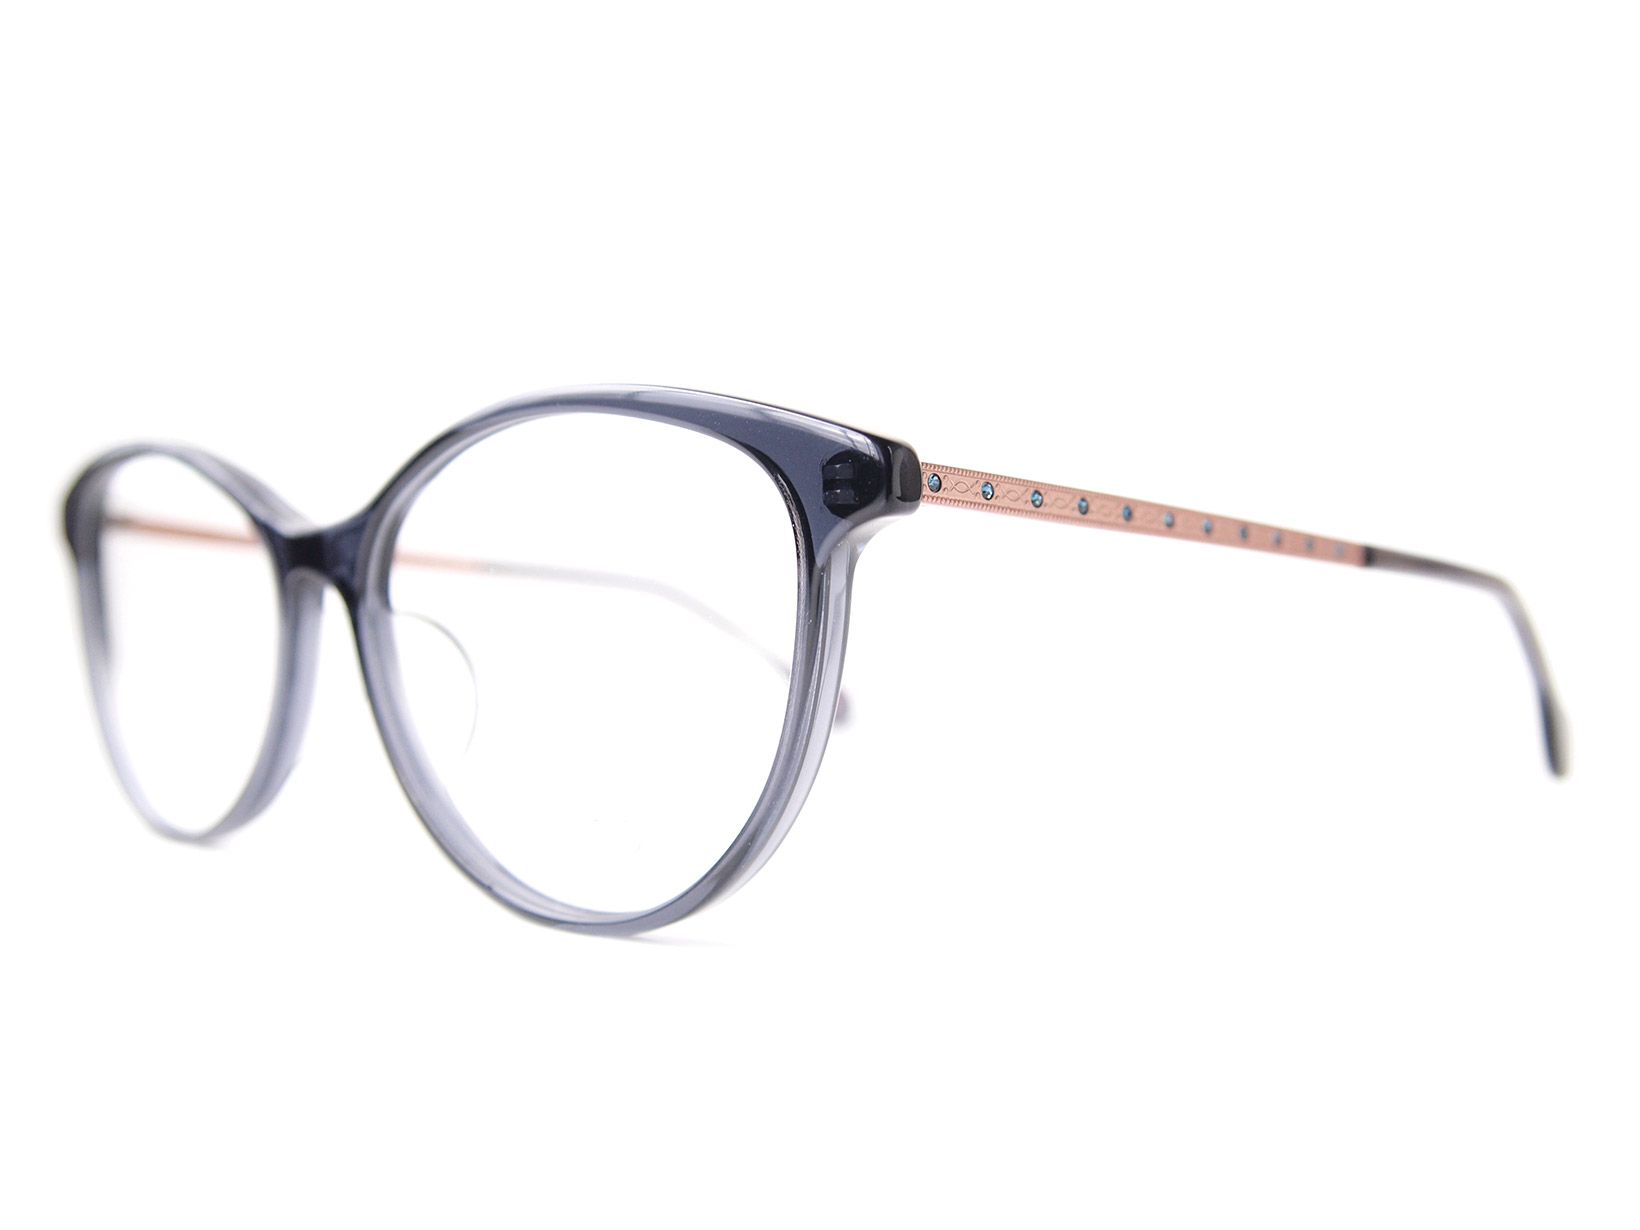 AKITTO 2016-4th may-p color｜BL size:53□15 material:acetate＋titanium price:42,000-(＋tax)